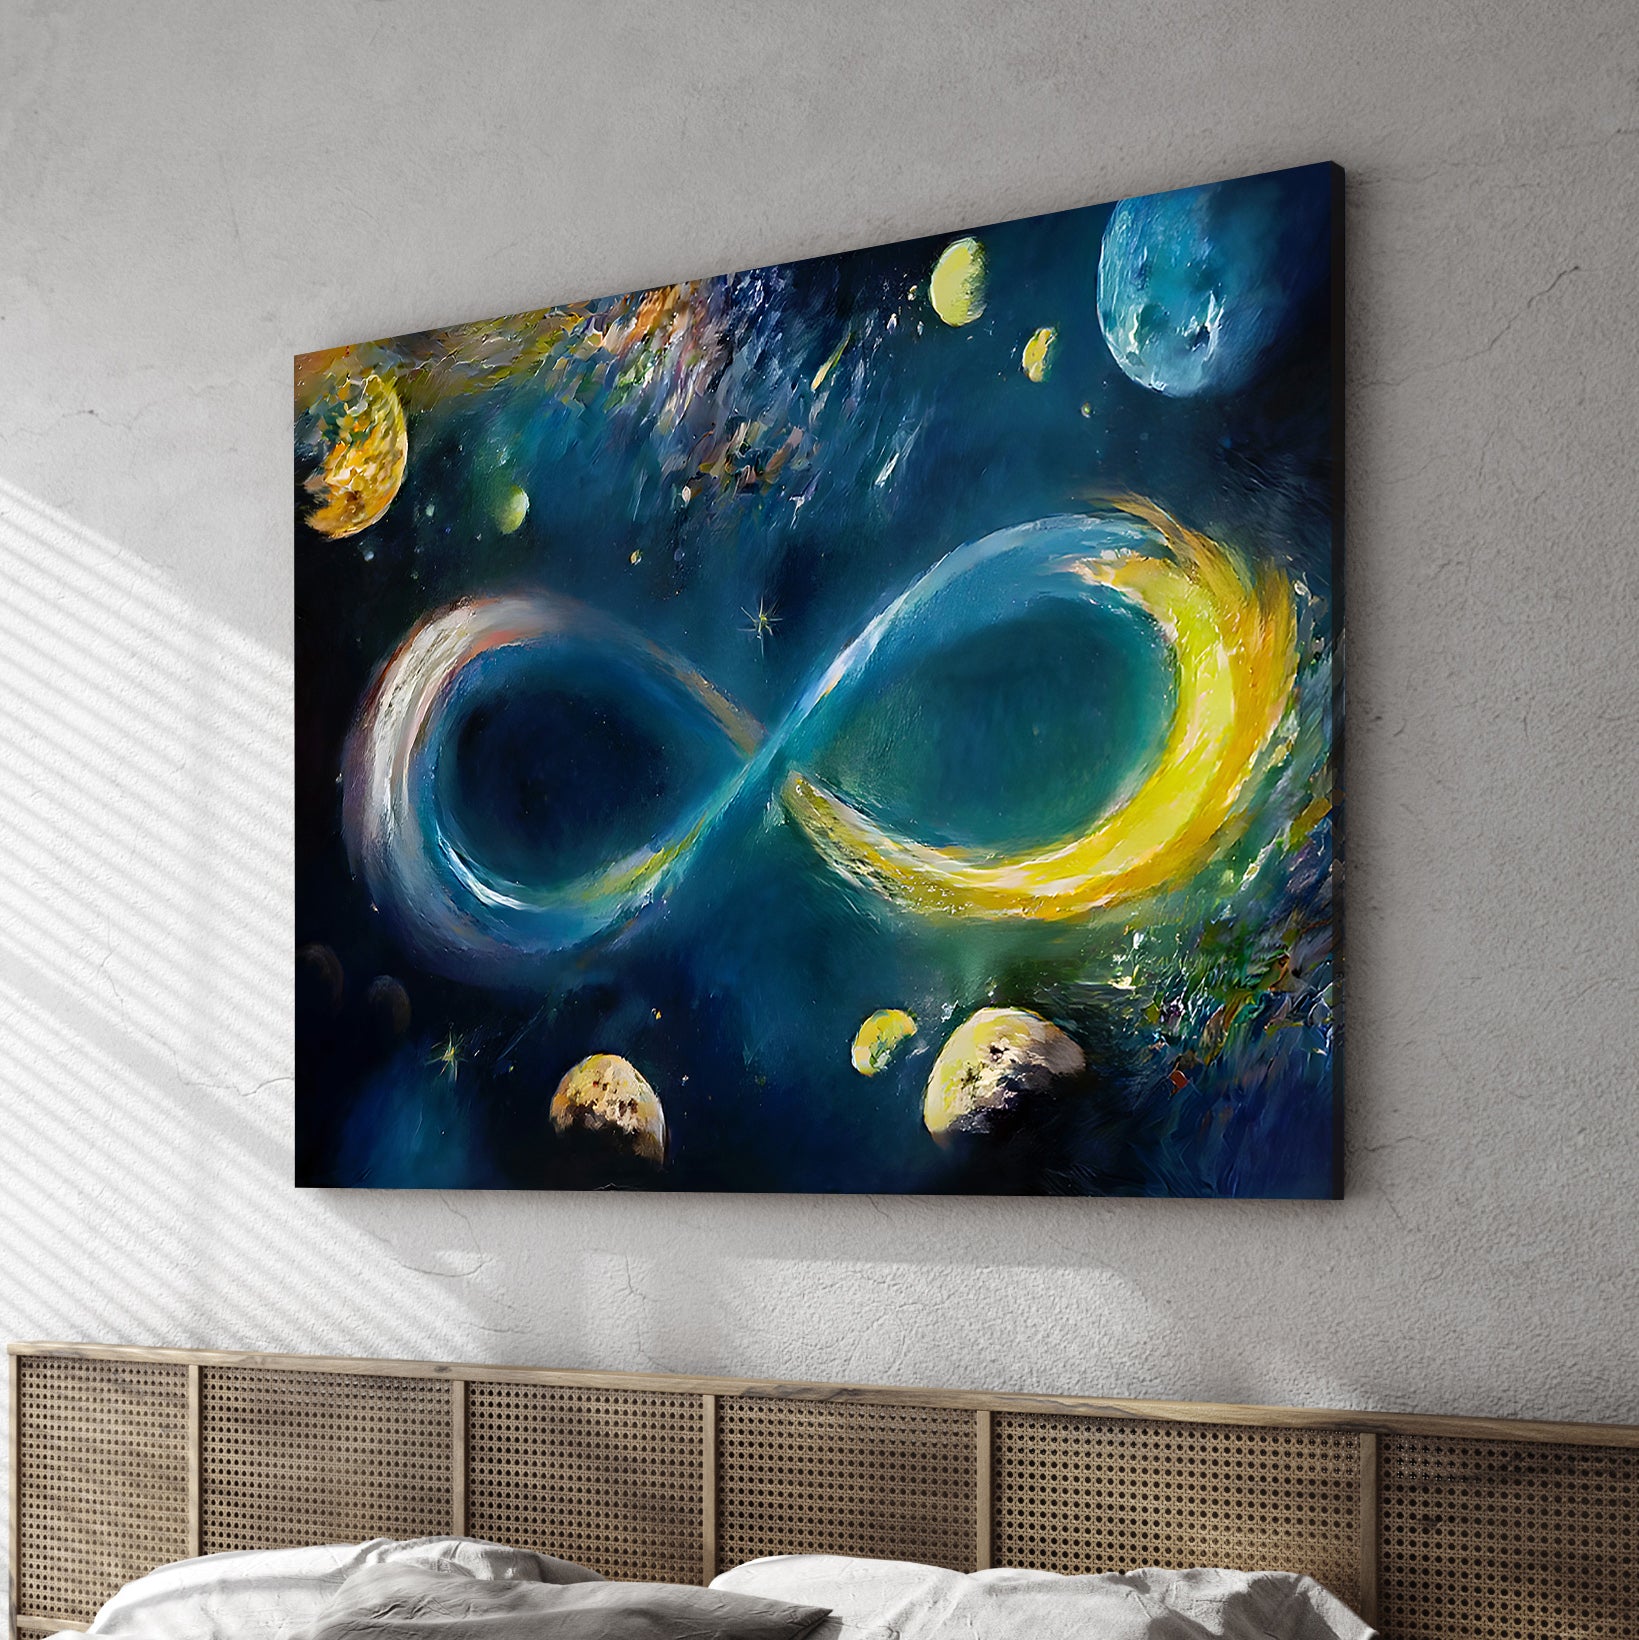 Infinite Galaxy, Gymnopedie Style Wall Decor, Wall Art, Artistic Painting, Stretched Canvas Painting, Creative Digital Artwork